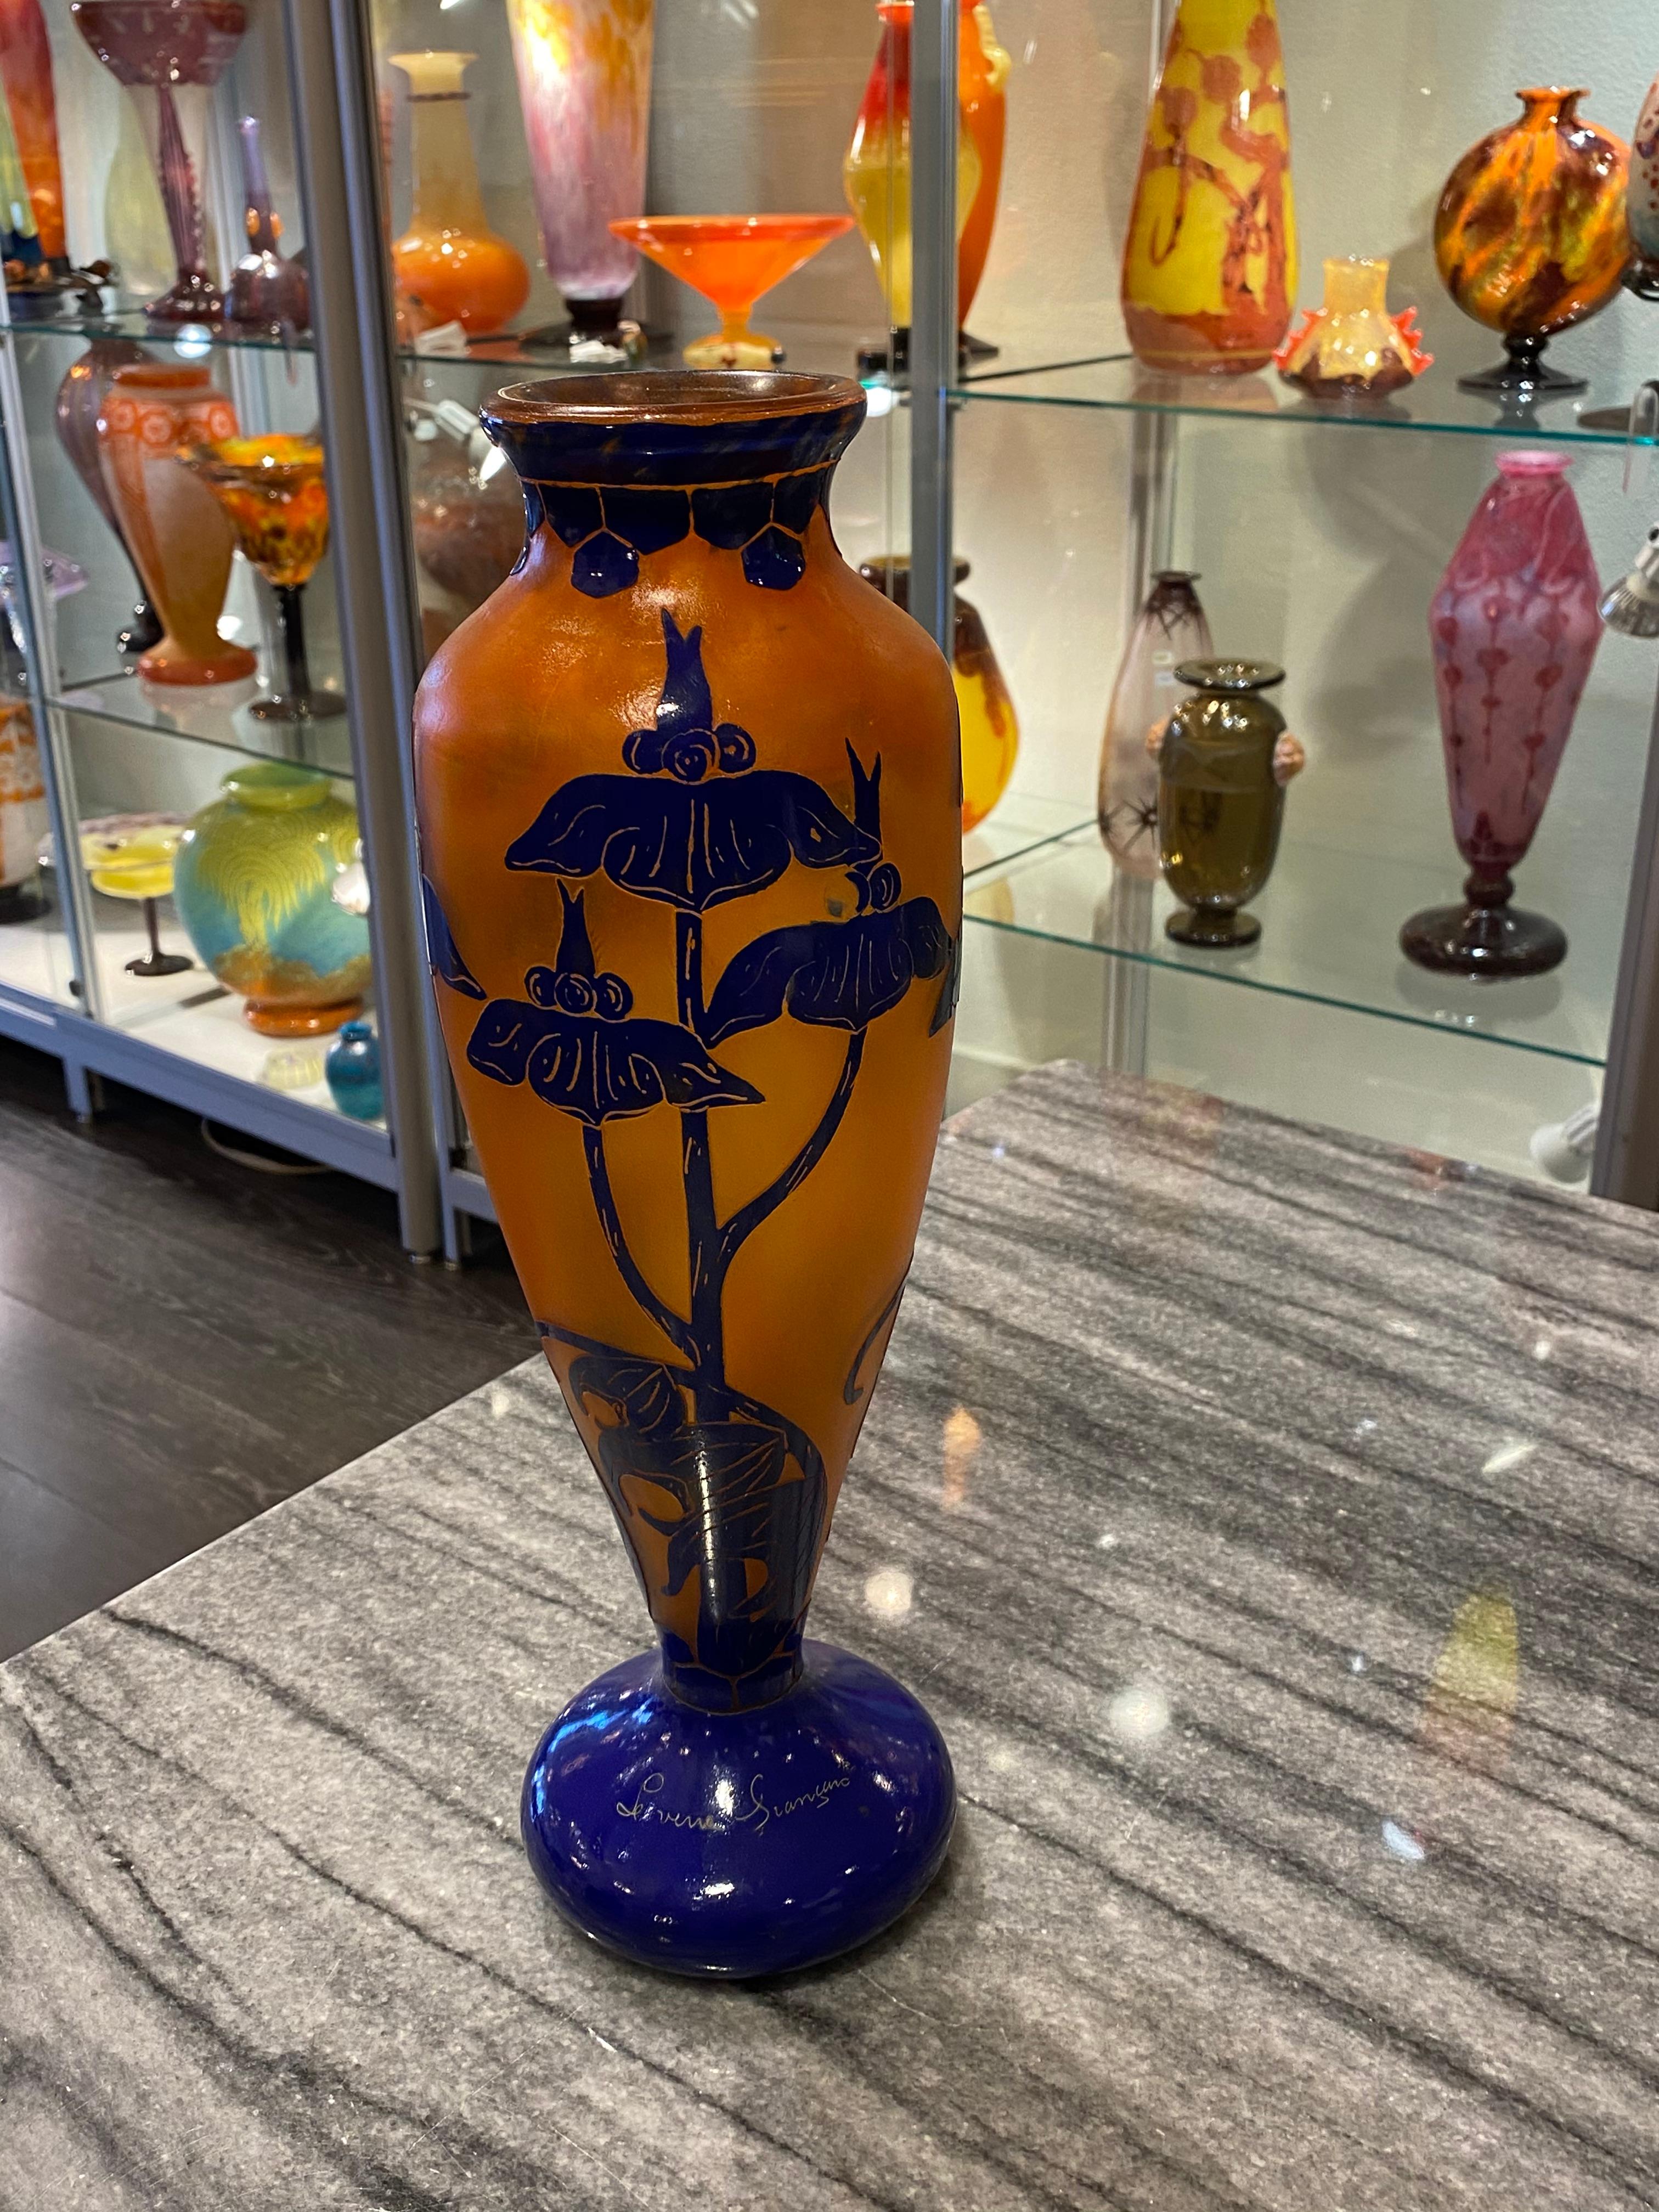 Art Deco cameo glass by Le Verre Francais (Charles Schneider) in the pattern called Solaneé, orange color and overlay by cobalt blue carved glass.
Made in France
Signature: Le Verre Françias.
  